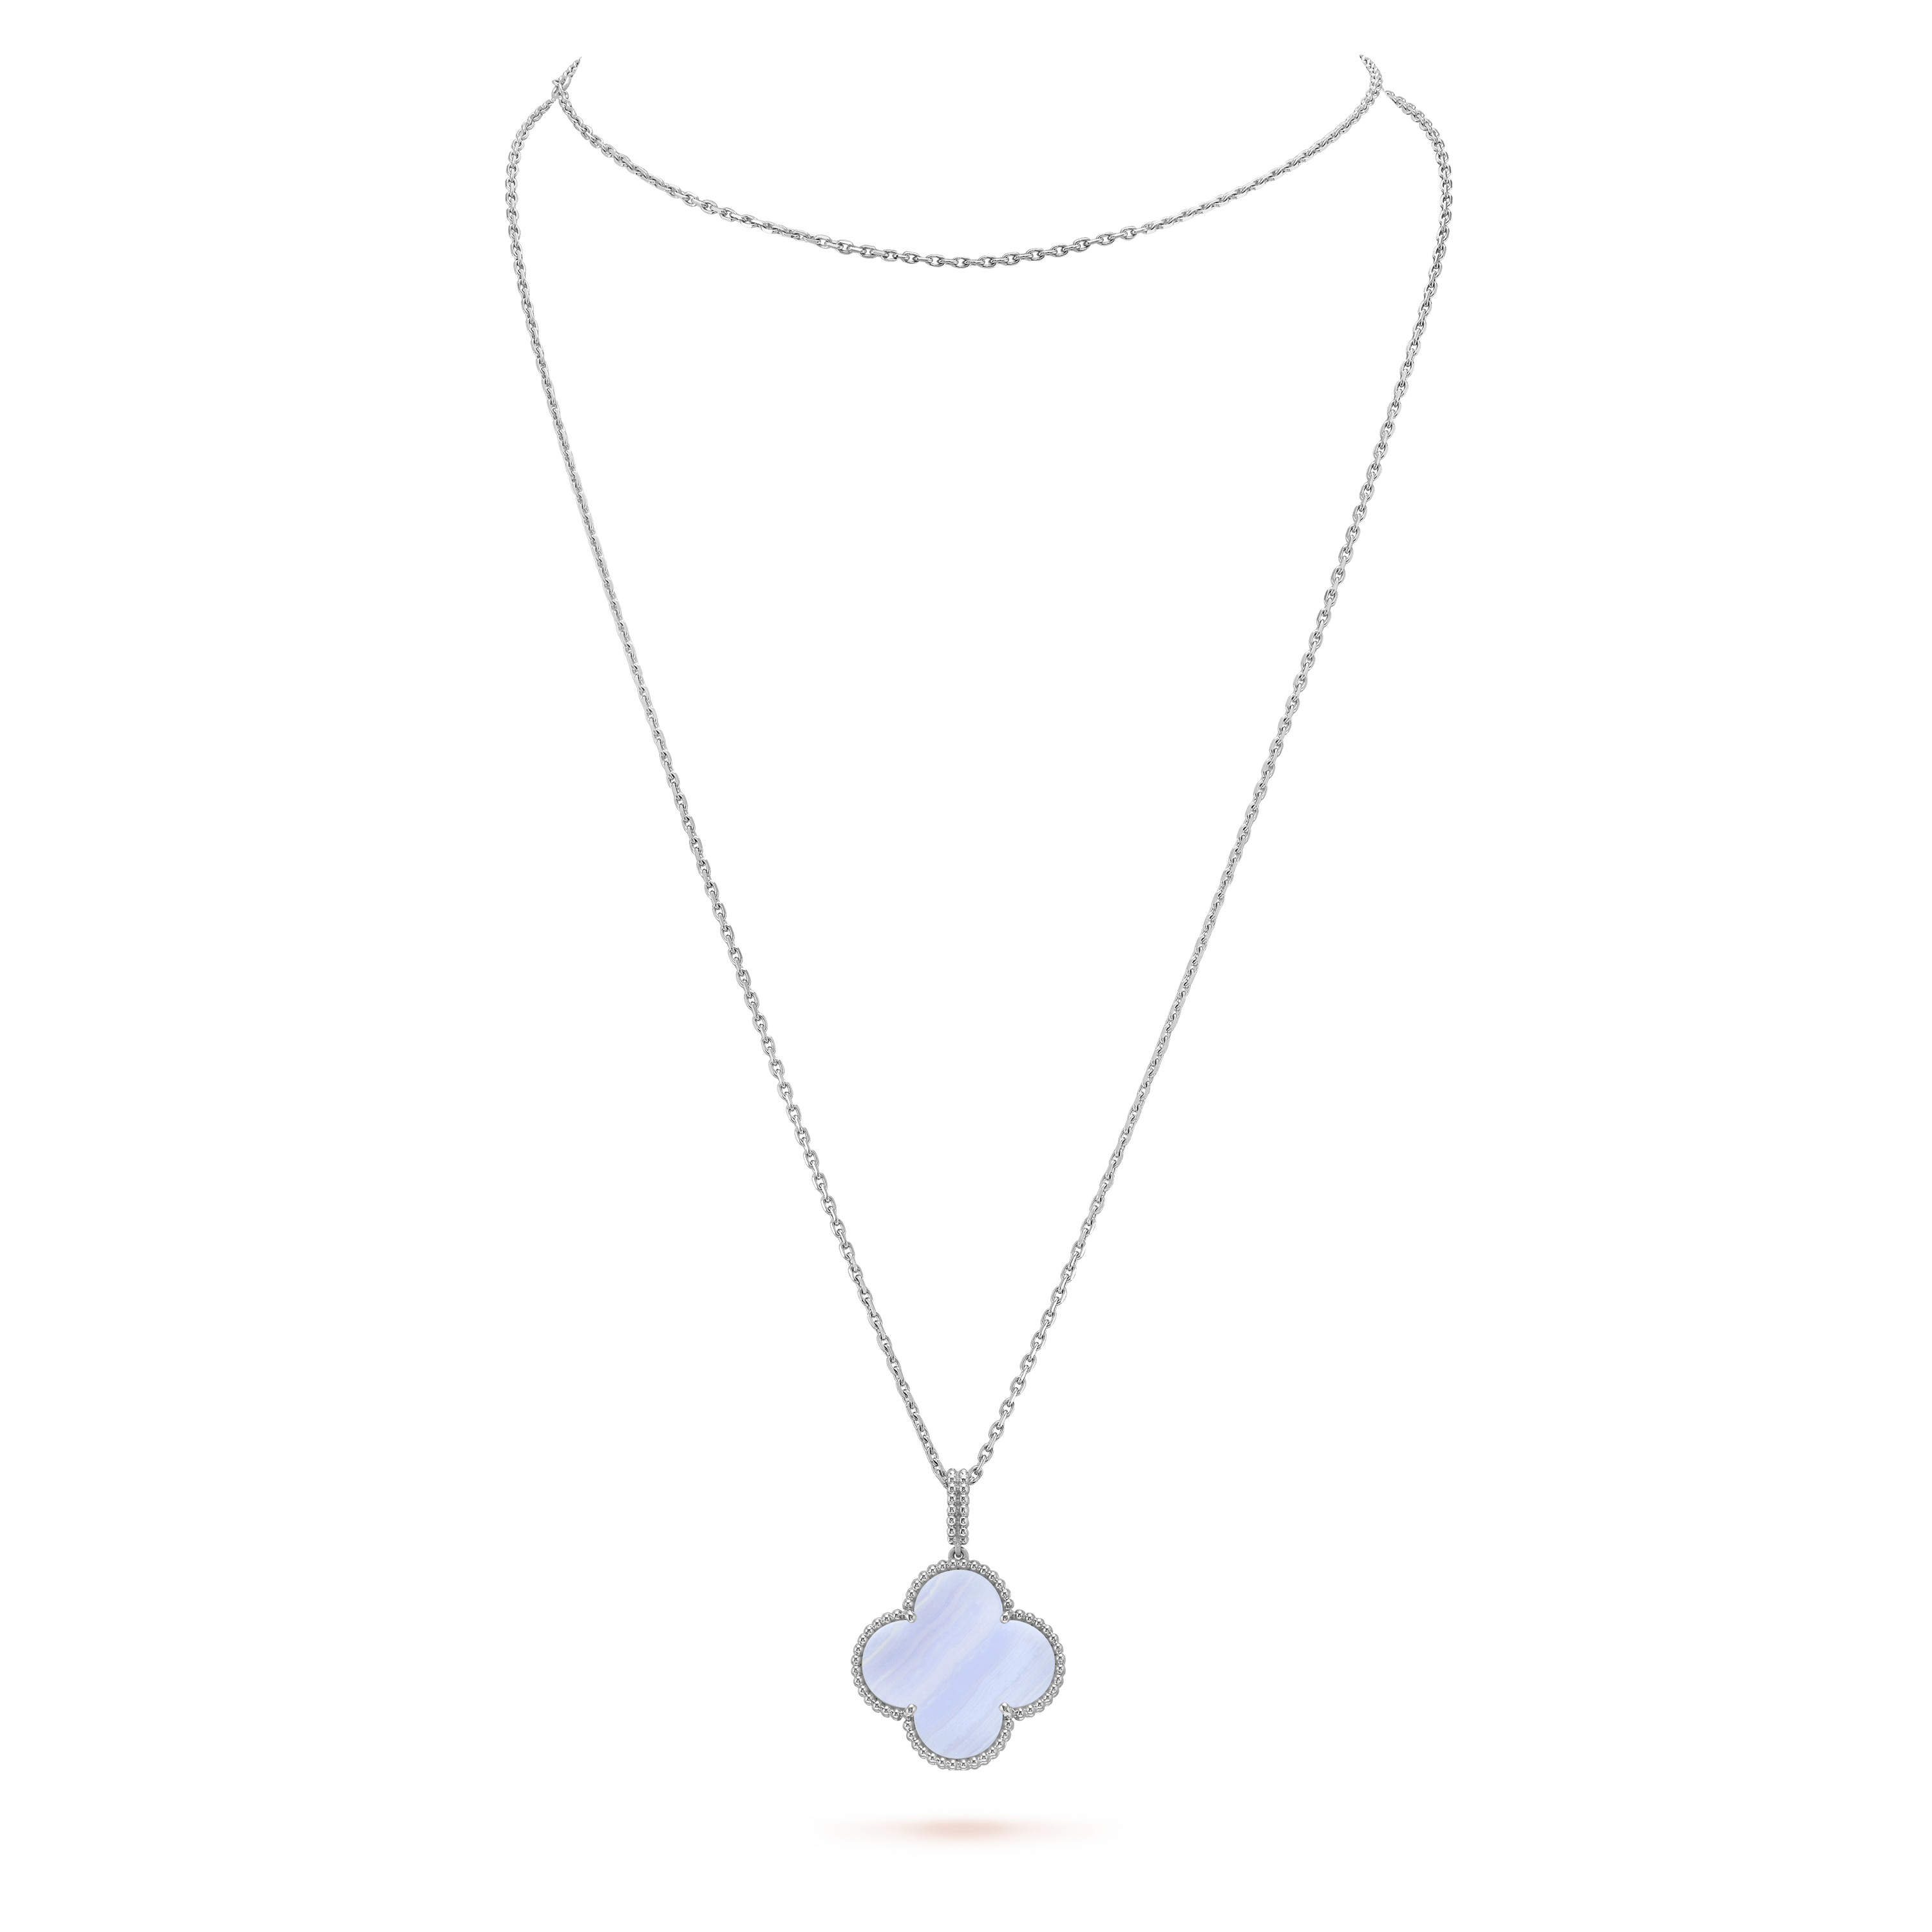 Magic Alhambra long necklace, 1 motif 18K yellow gold, Mother-of-pearl -  Van Cleef & Arpels